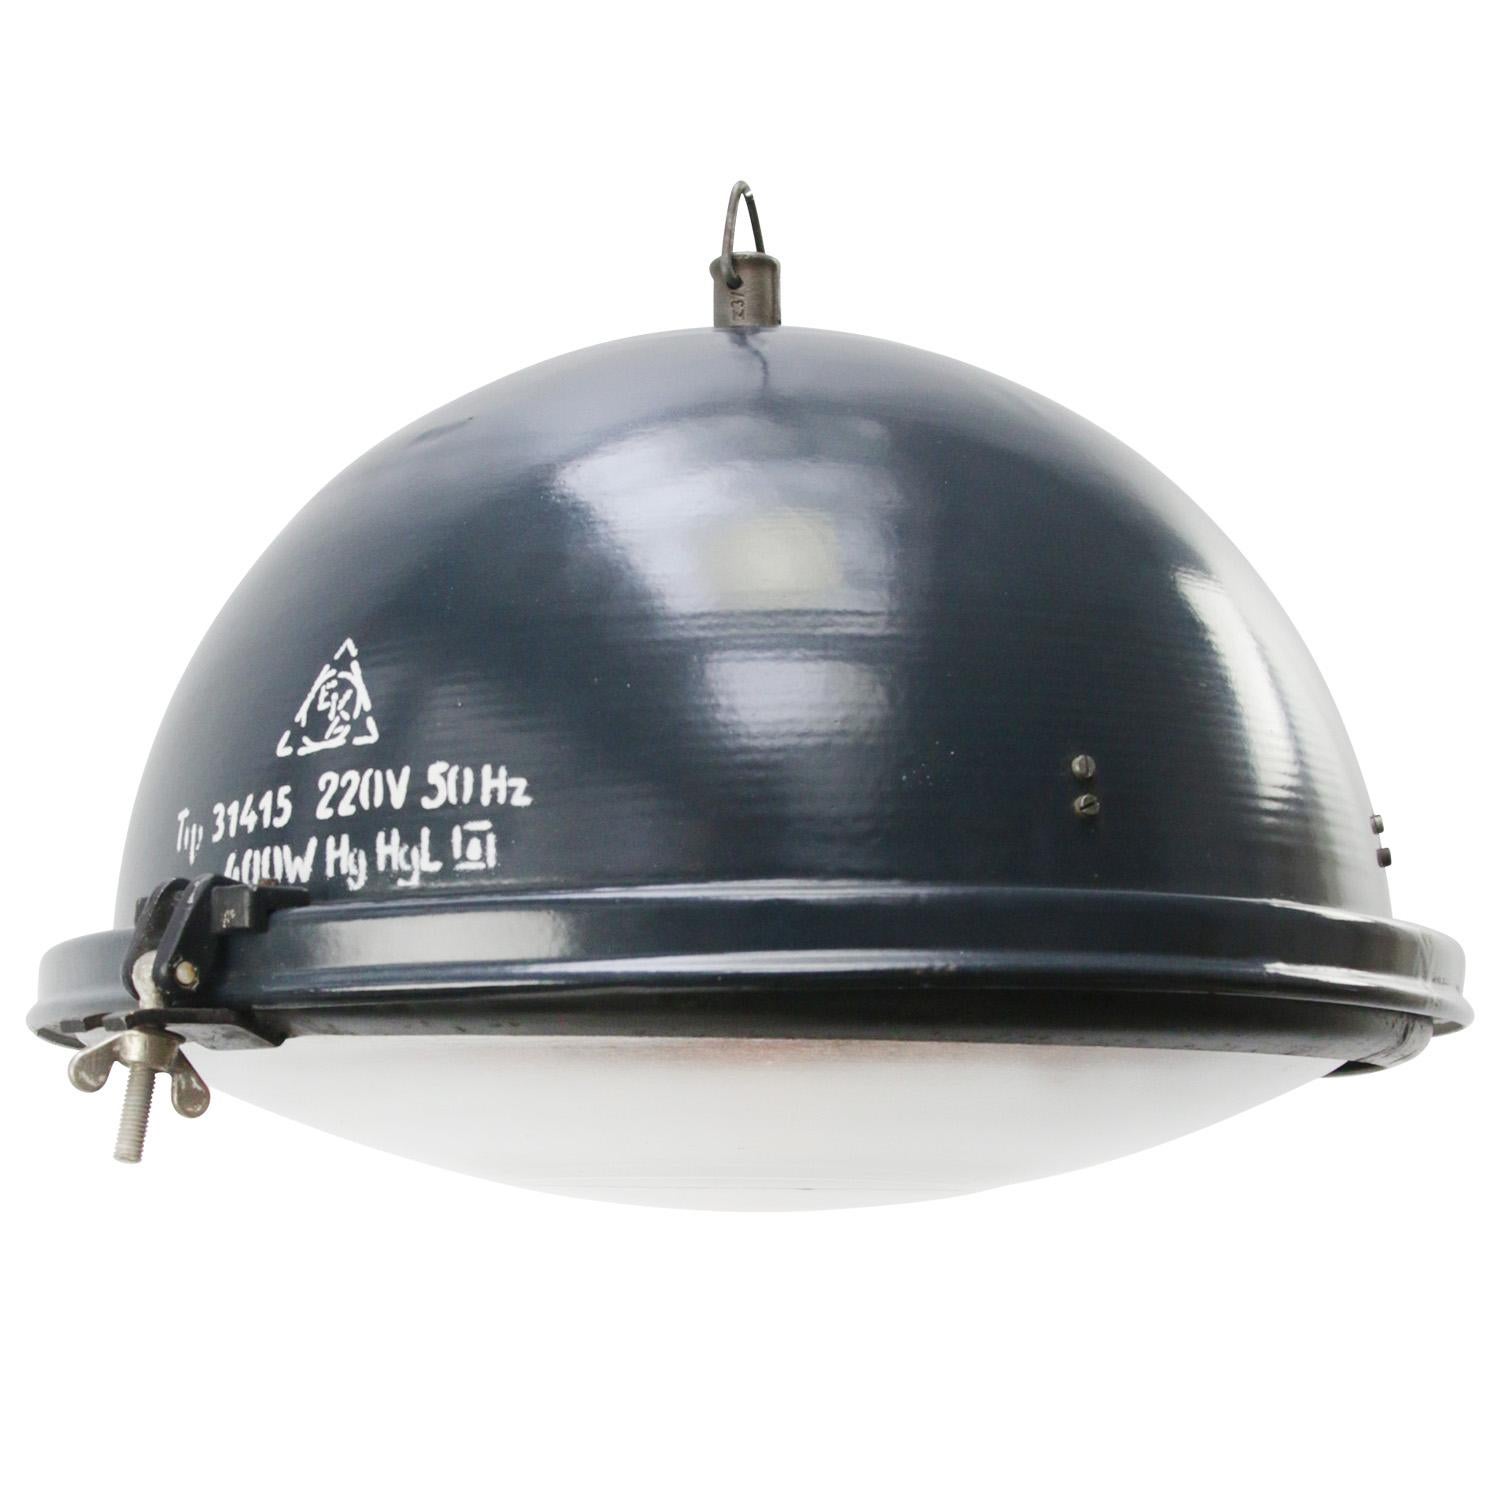 Factory pendant. Blue enamel white interior. Cast iron hook.
Clear glass.

Weight: 5.50 kg / 12.1 lb

Priced per individual item. All lamps have been made suitable by international standards for incandescent light bulbs, energy-efficient and